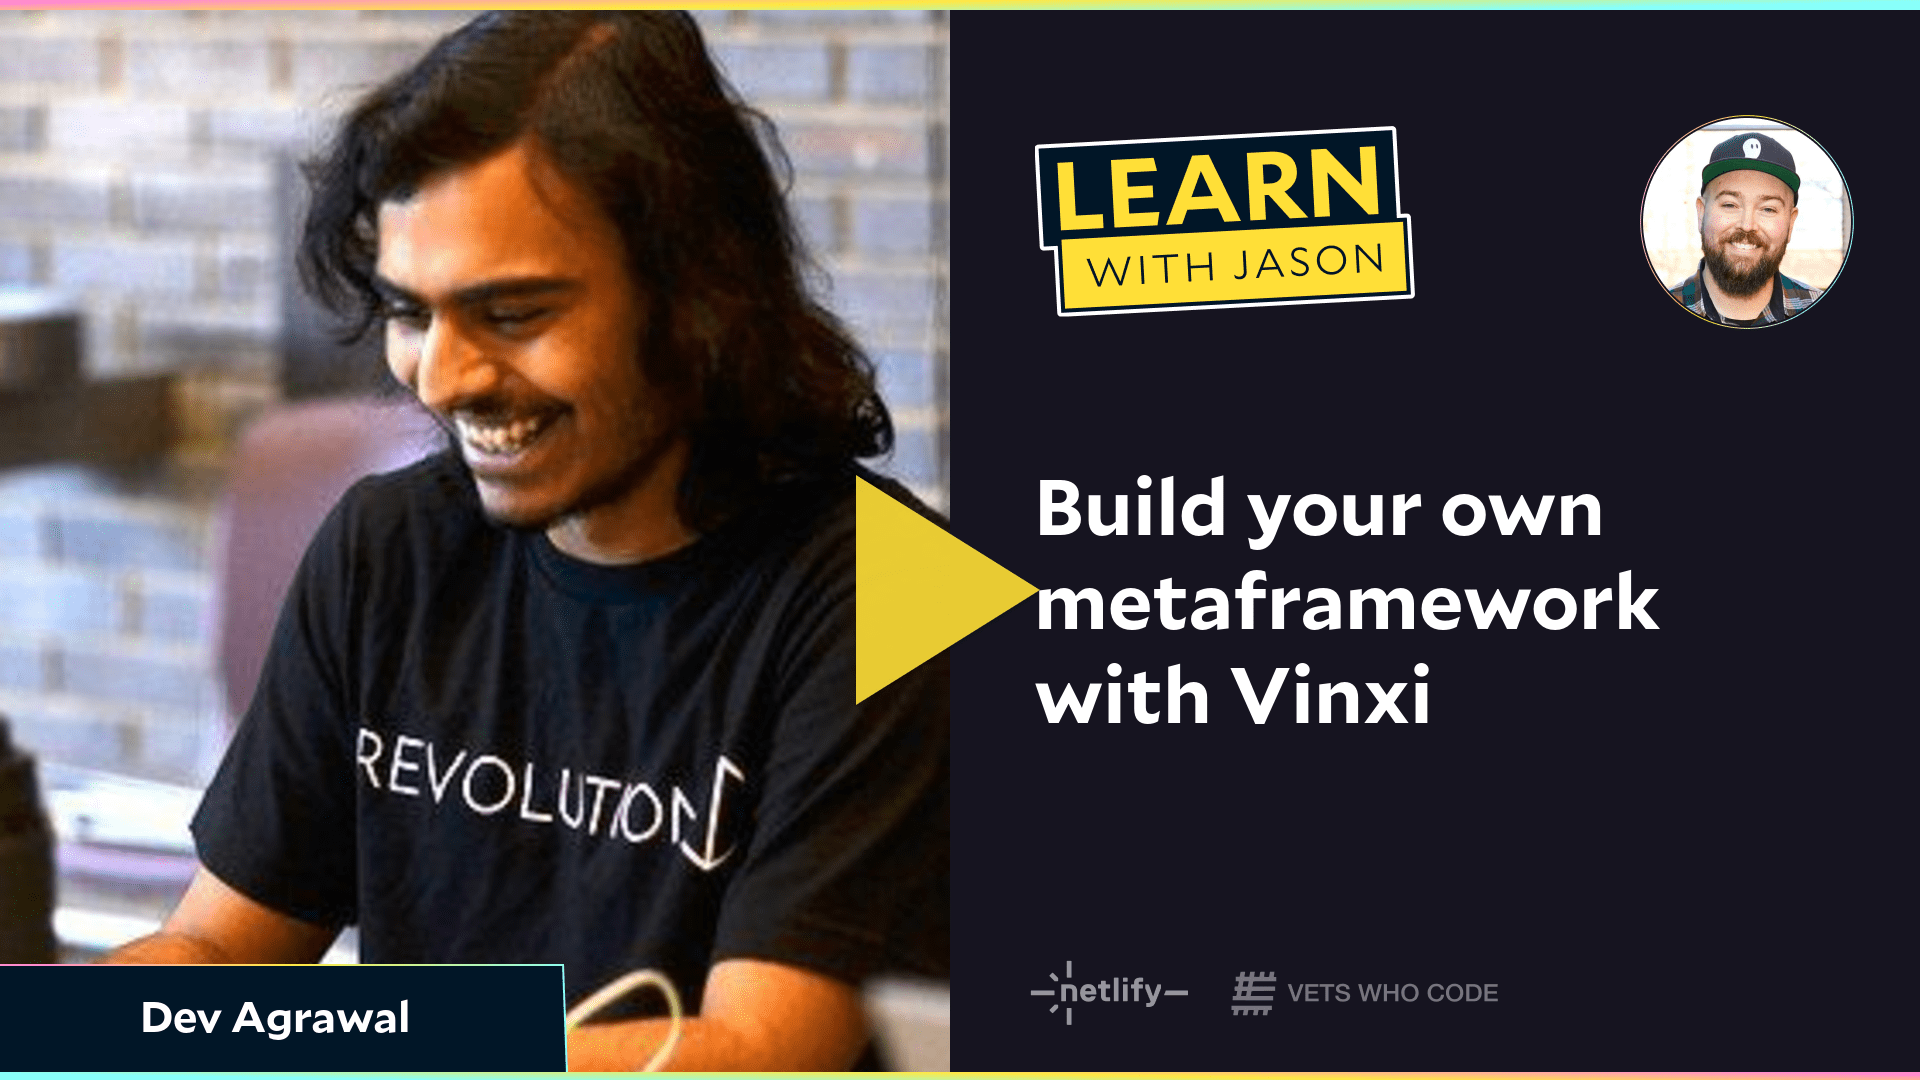 Build your own metaframework with Vinxi (with Dev Agrawal)